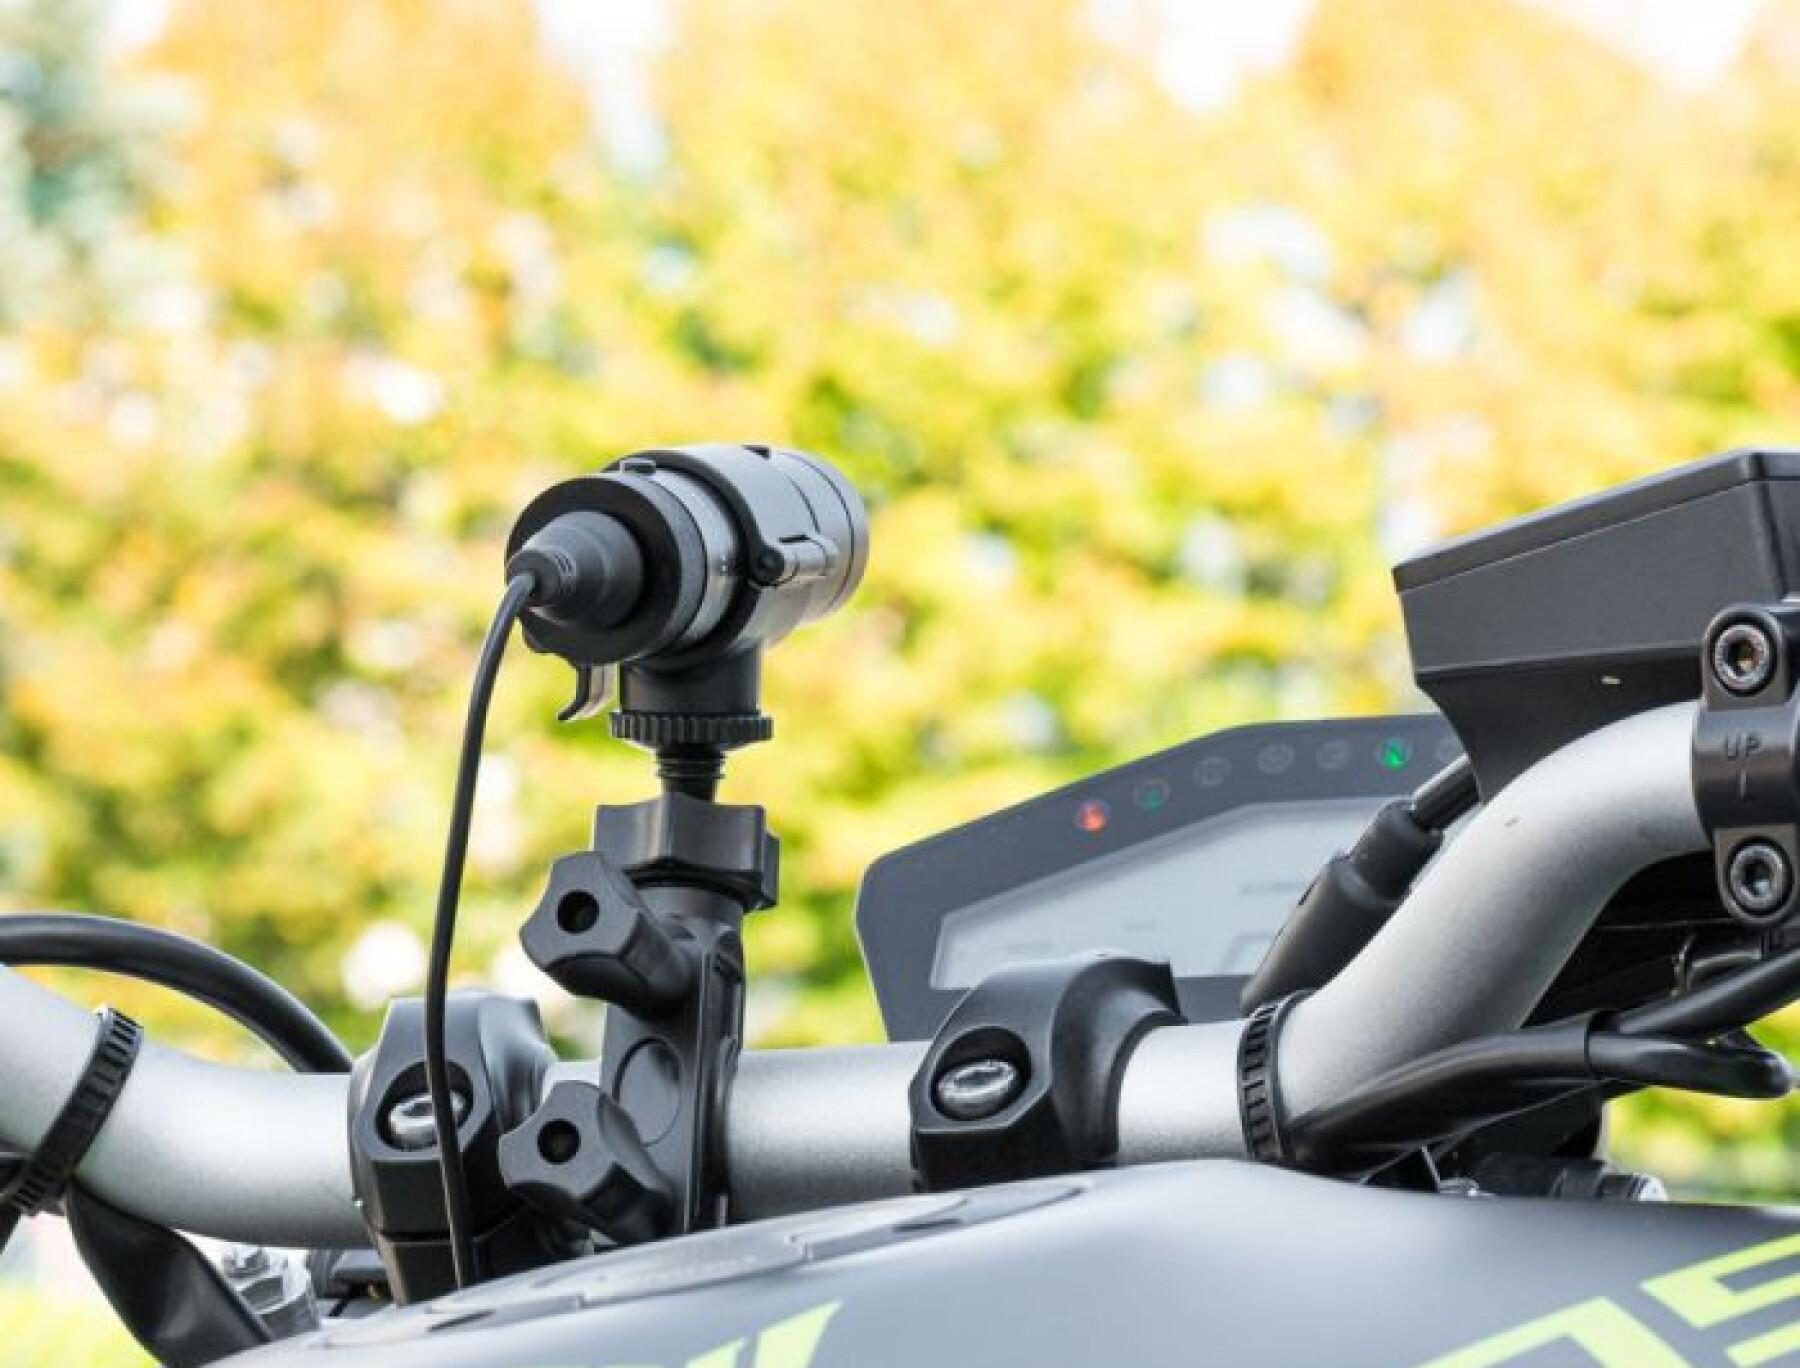 Everything You Should Know About Dash Cams